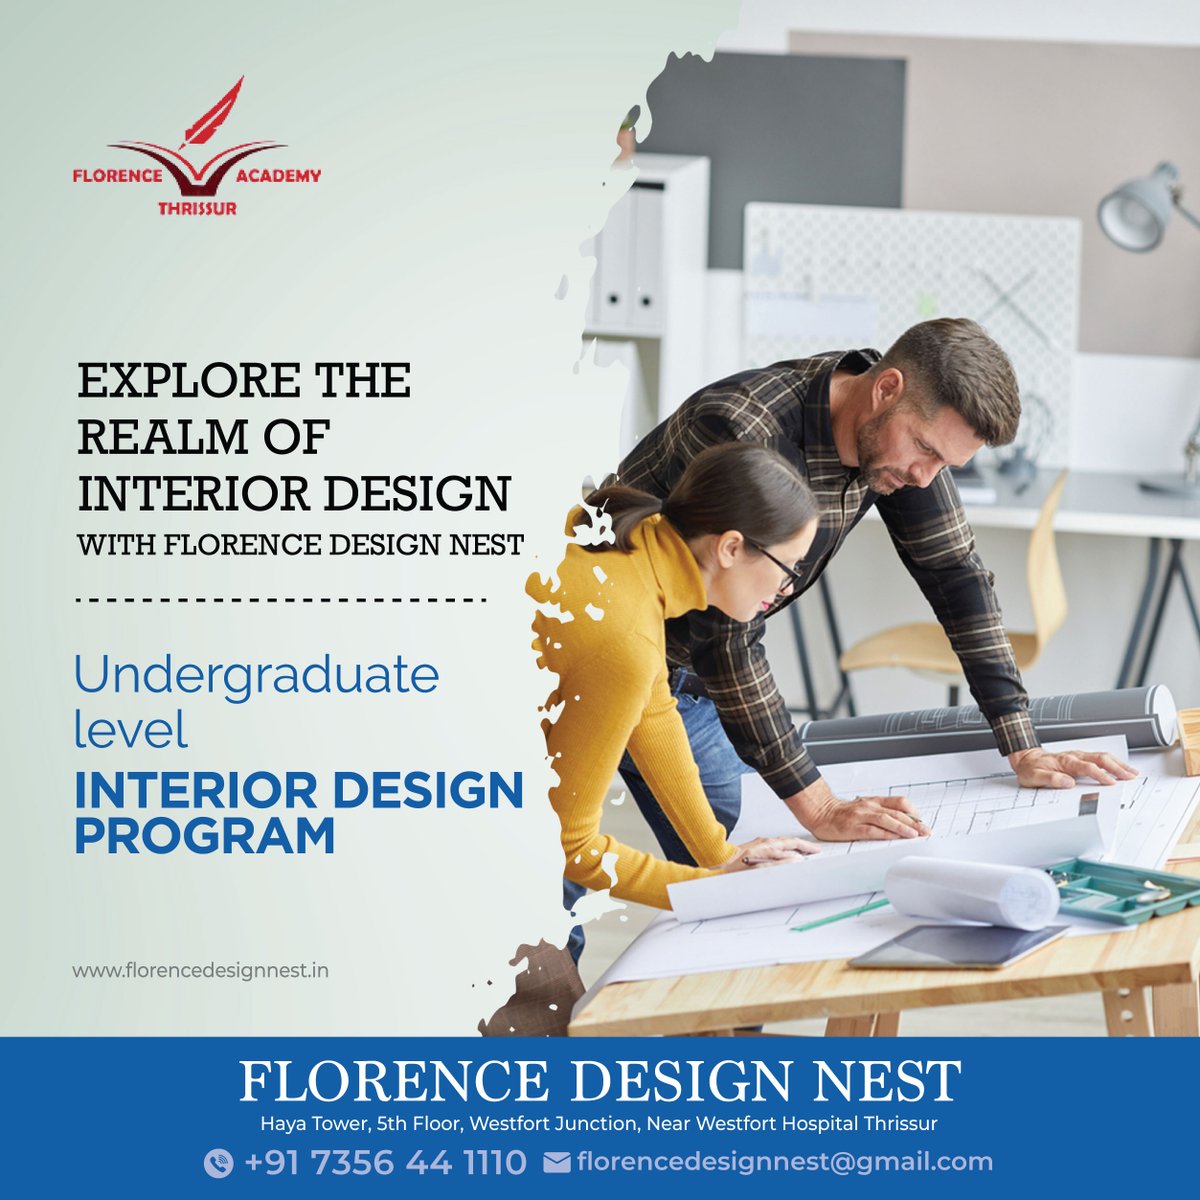 Diving into the world of design excellence with Florence Design Nest's undergraduate-level Interior Design program. Unleashing creativity and honing skills for a vibrant future. 🌟🎓#FlorenceDesignNest #InteriorDesignJourney #CreativeEducation #DesignExcellence #FutureDesigners